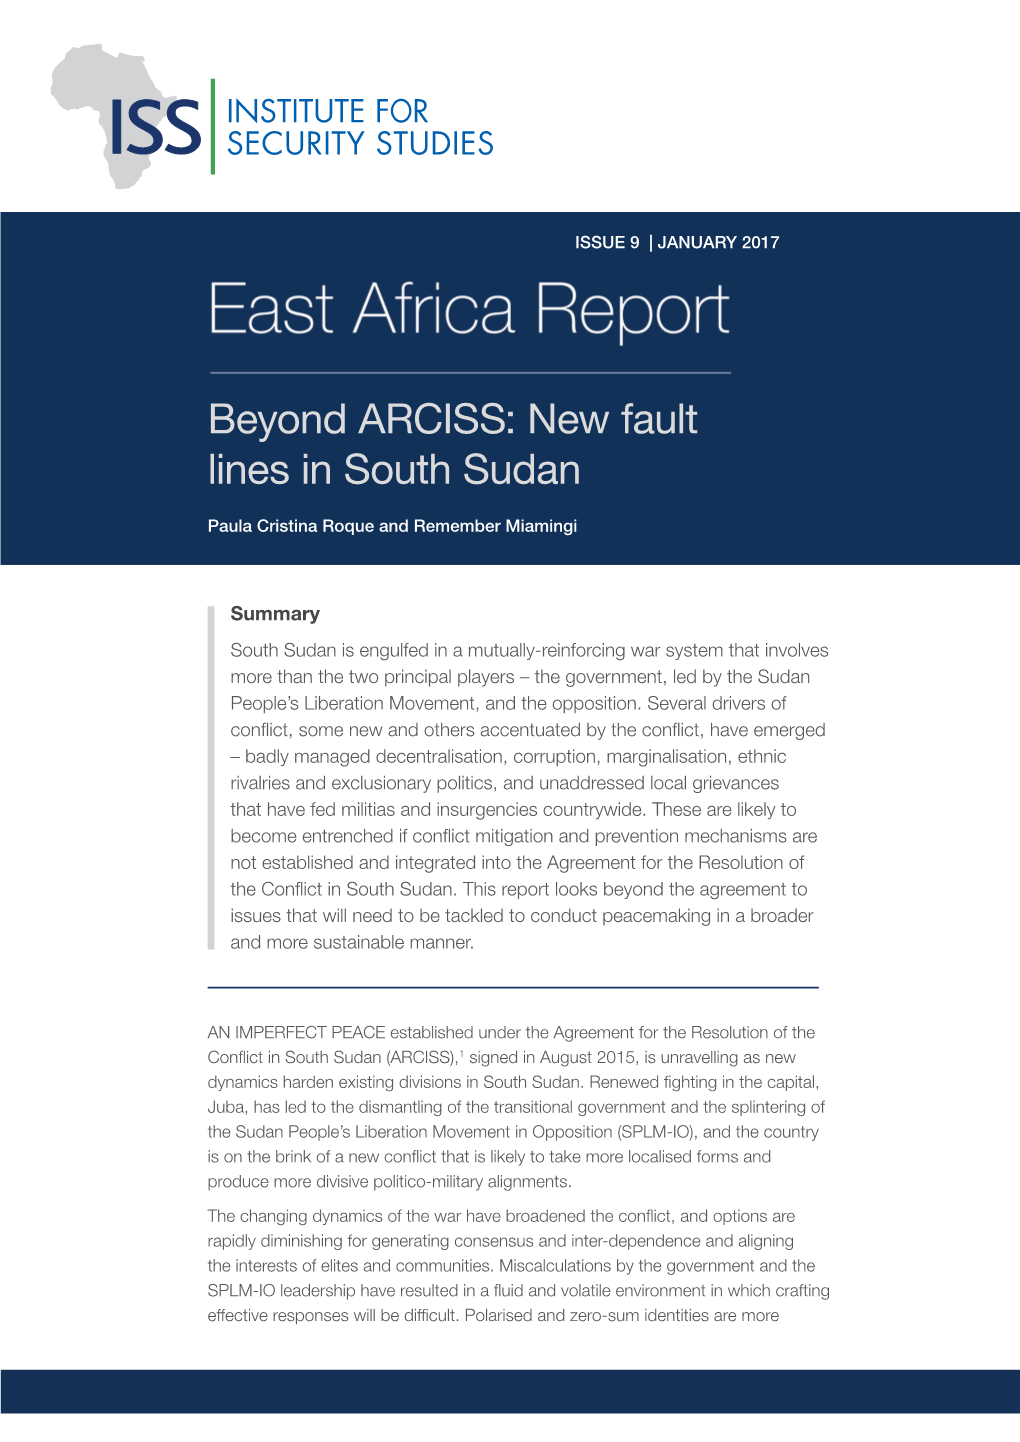 Beyond ARCISS: New Fault Lines in South Sudan